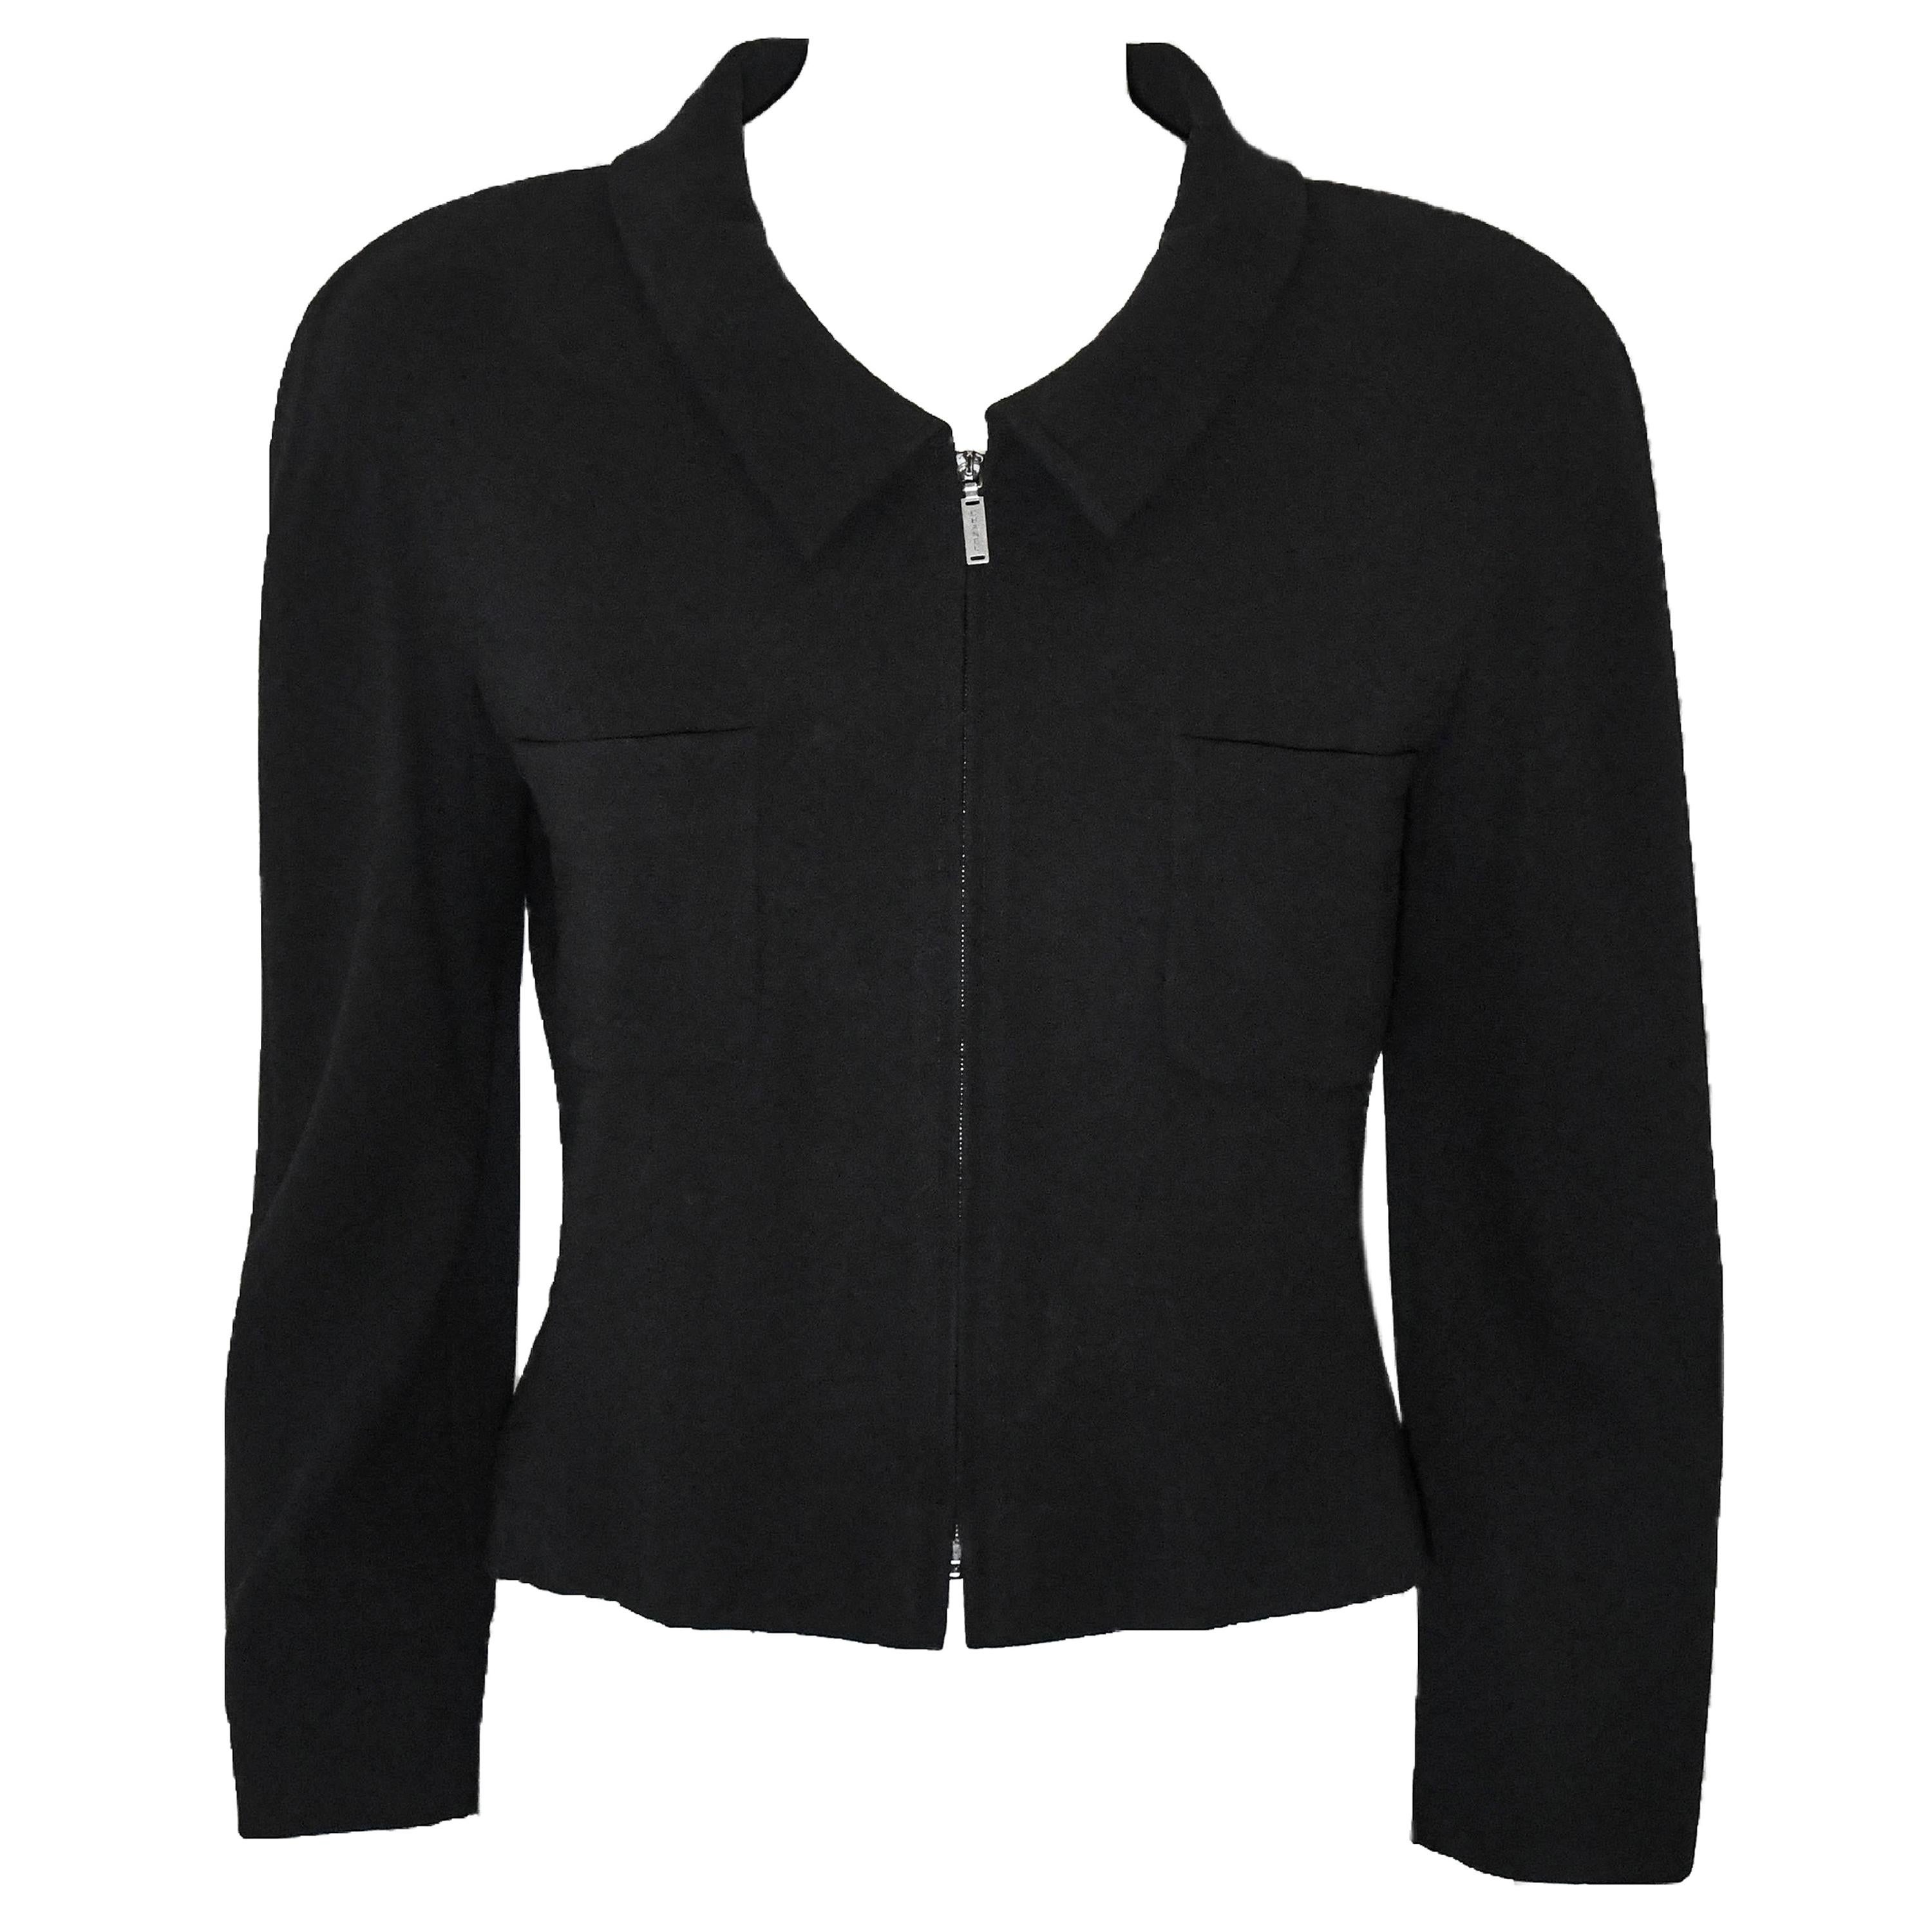 Chanel Black Cropped Jacket With Zip Front Closure With 2 Front